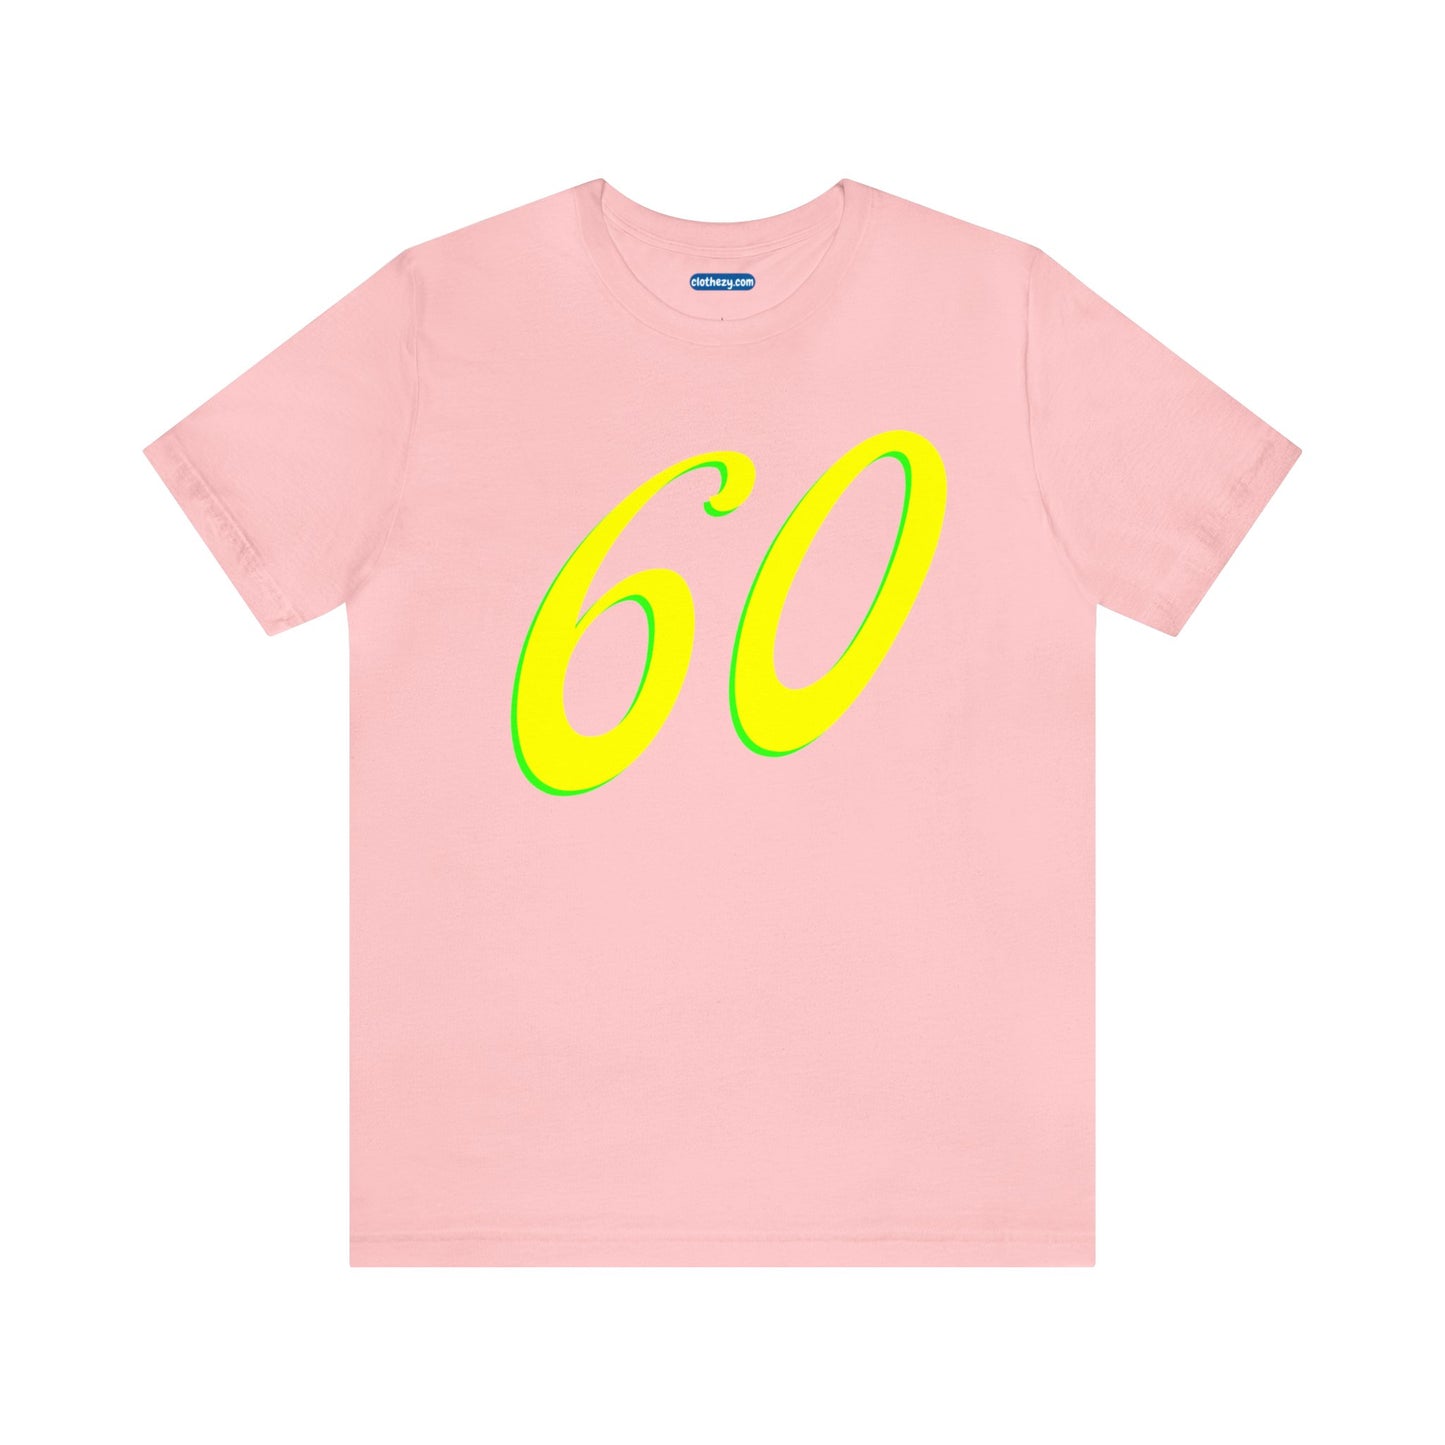 Number 60 Design - Soft Cotton Tee for birthdays and celebrations, Gift for friends and family, Multiple Options by clothezy.com in Pink Size Small - Buy Now